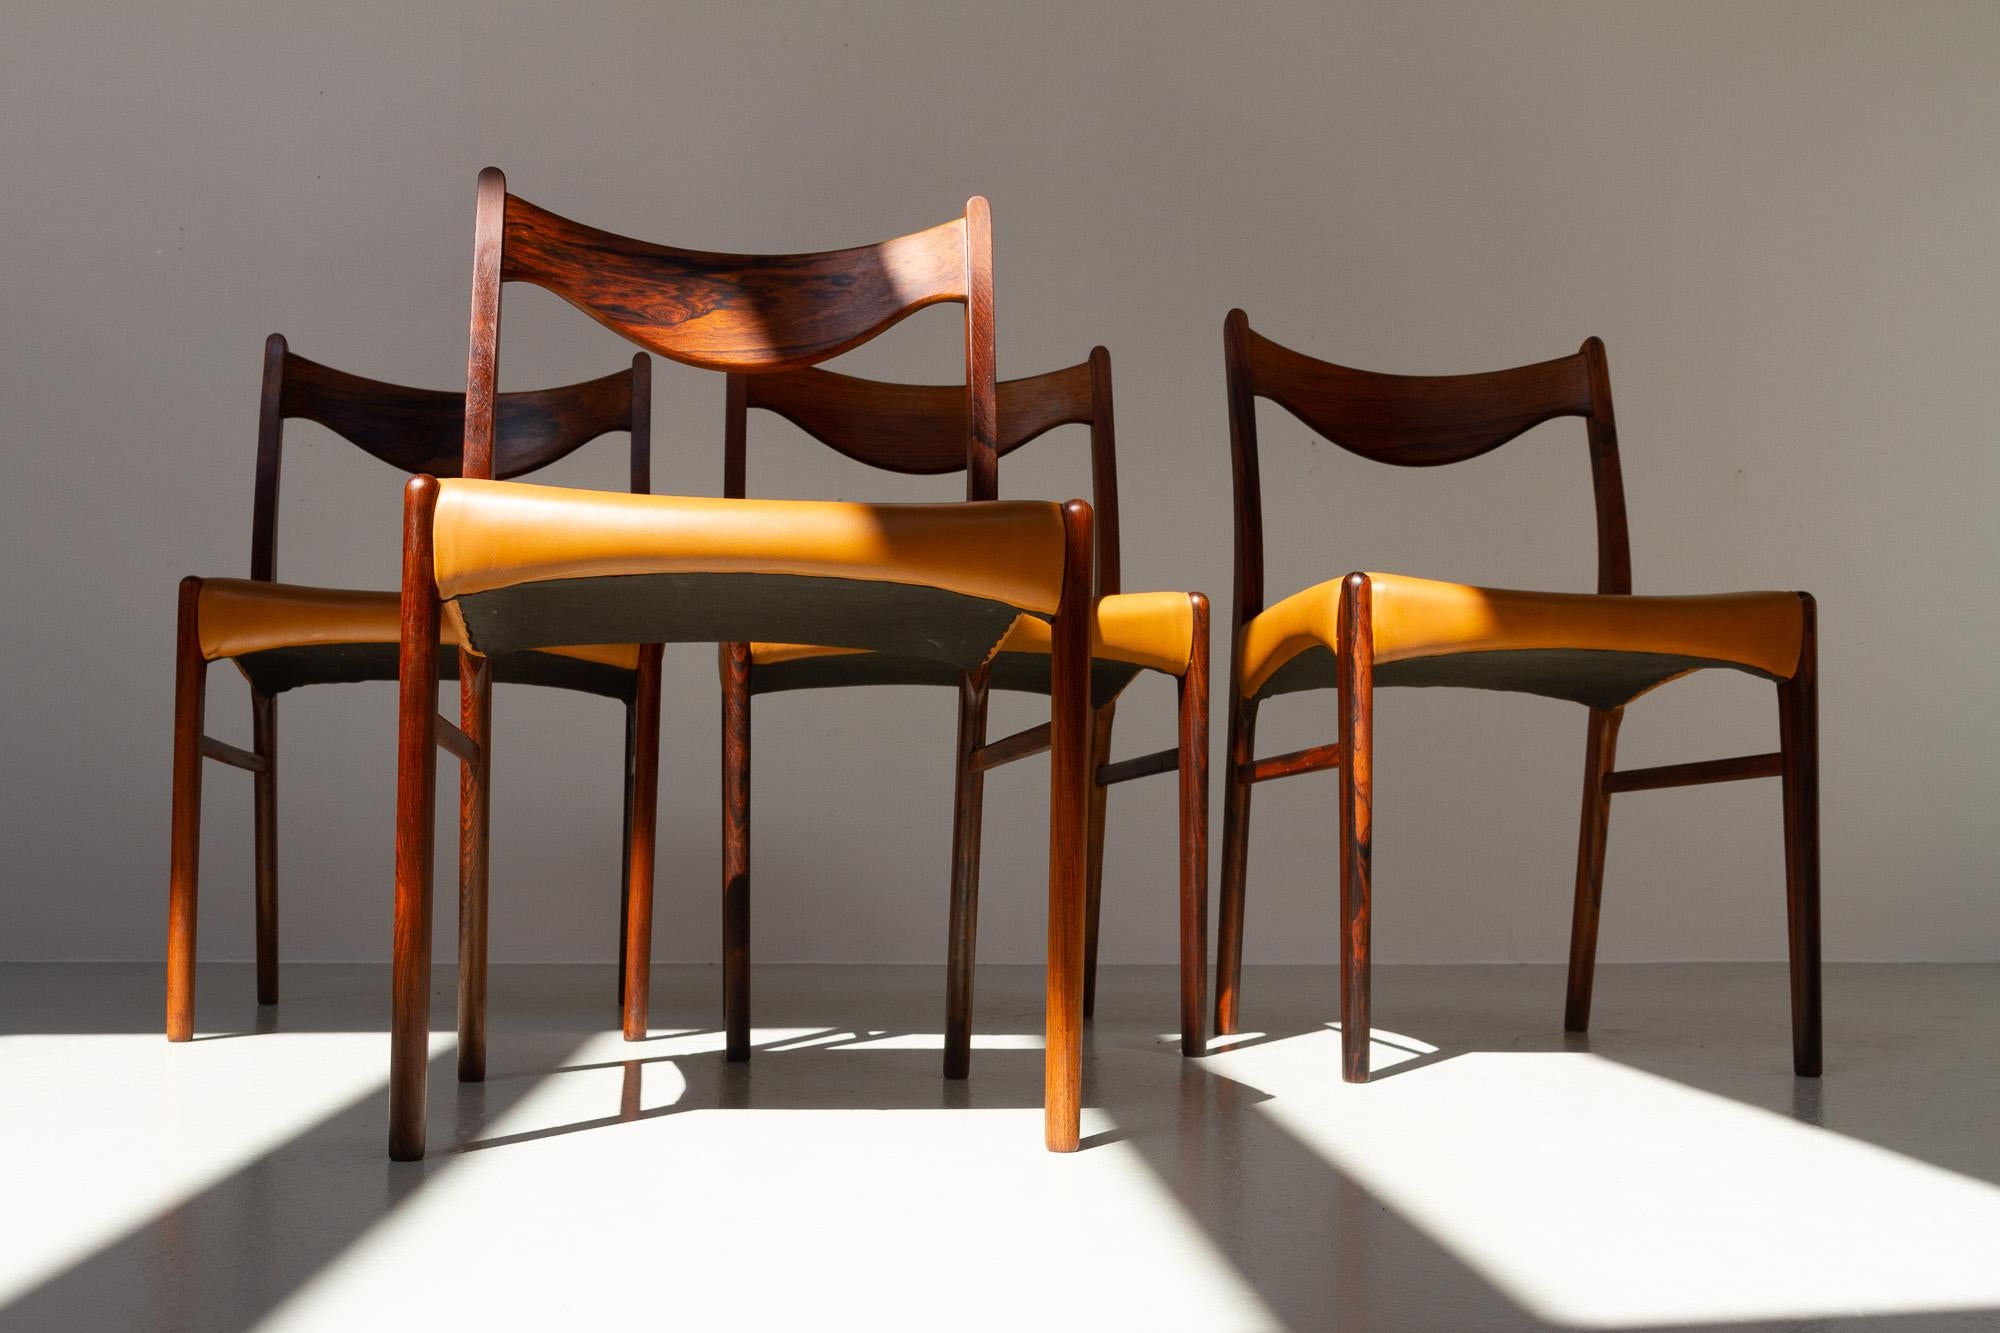 Mid-20th Century Danish Modern Rosewood Dining Room Chairs GS61 by Arne Wahl Iversen, 1950s